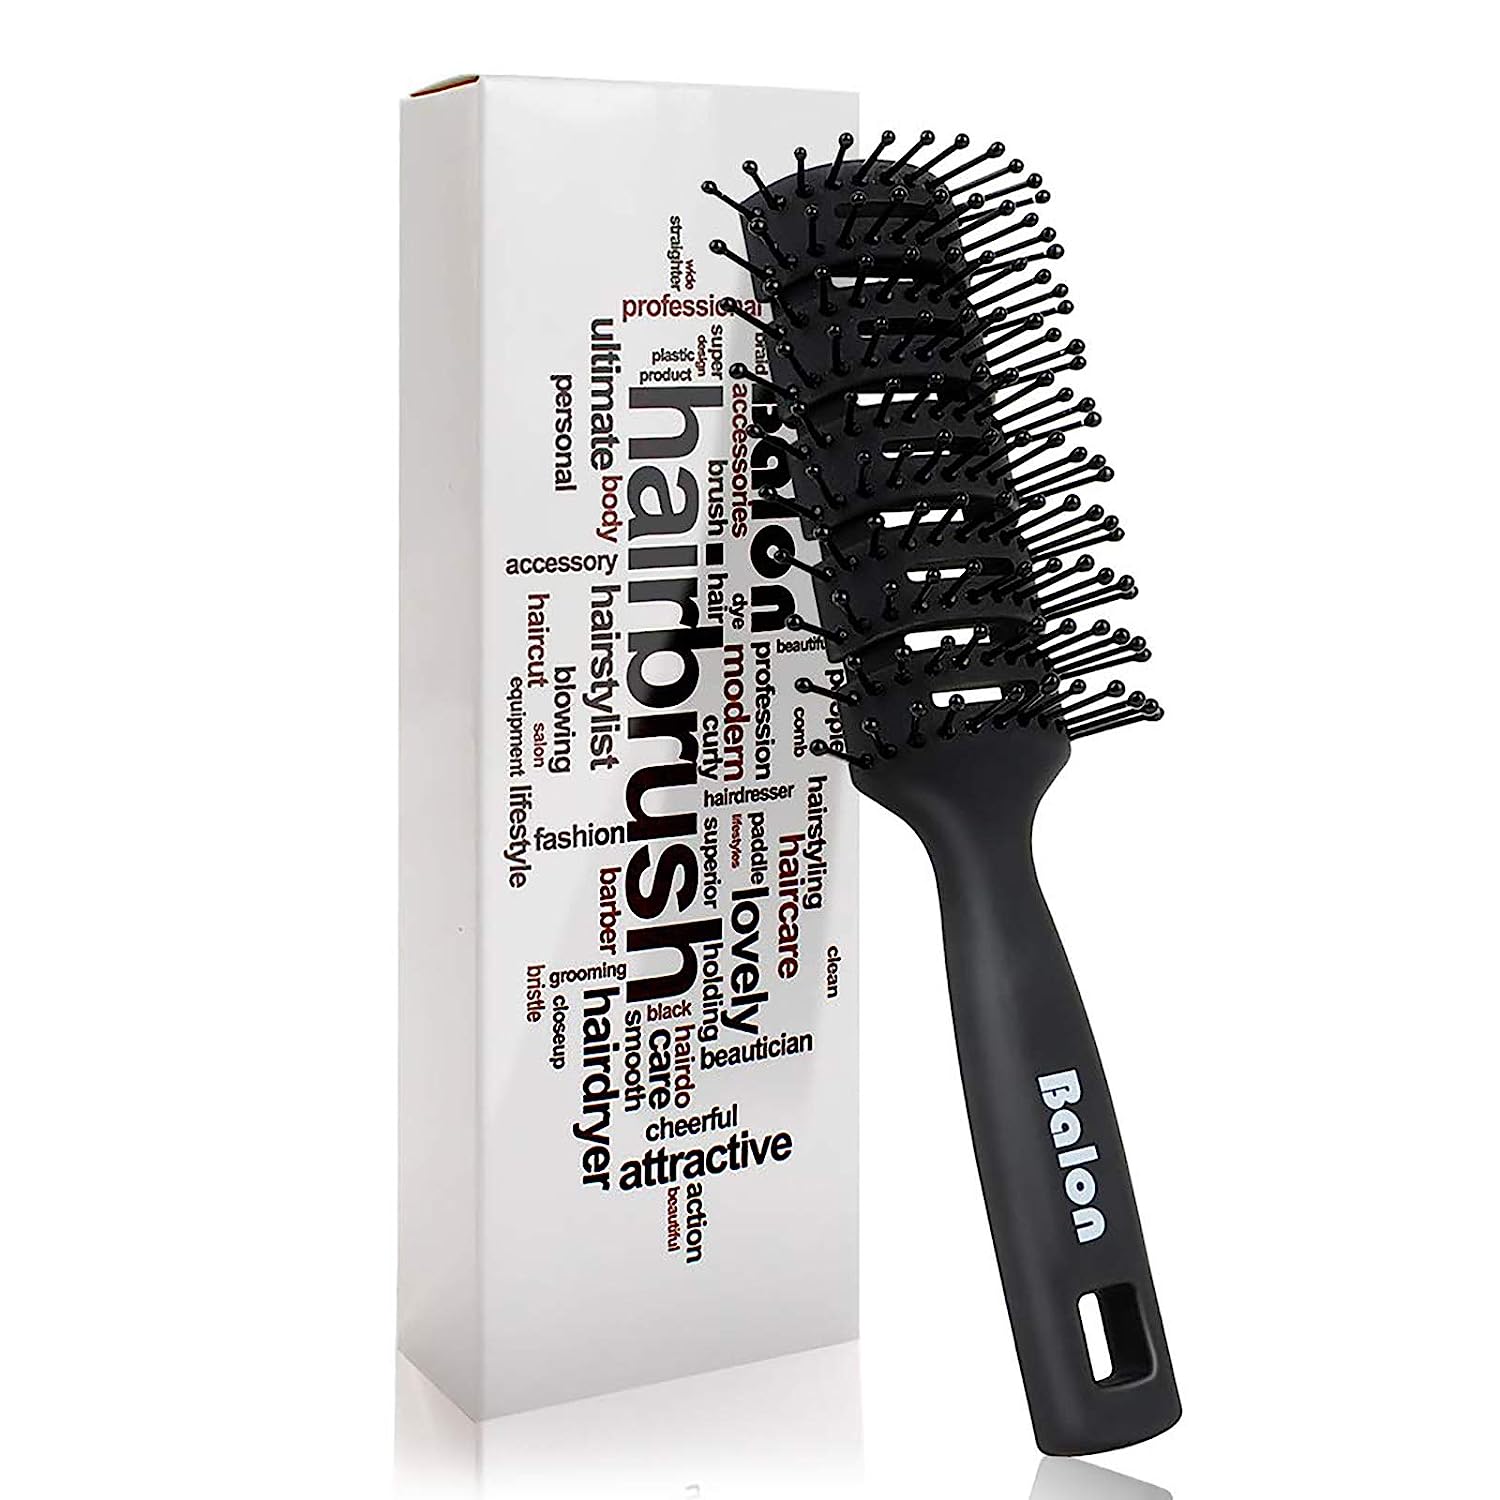 Vent Hair Brush, 11 Row Vented Hairbrush for Men and [...]